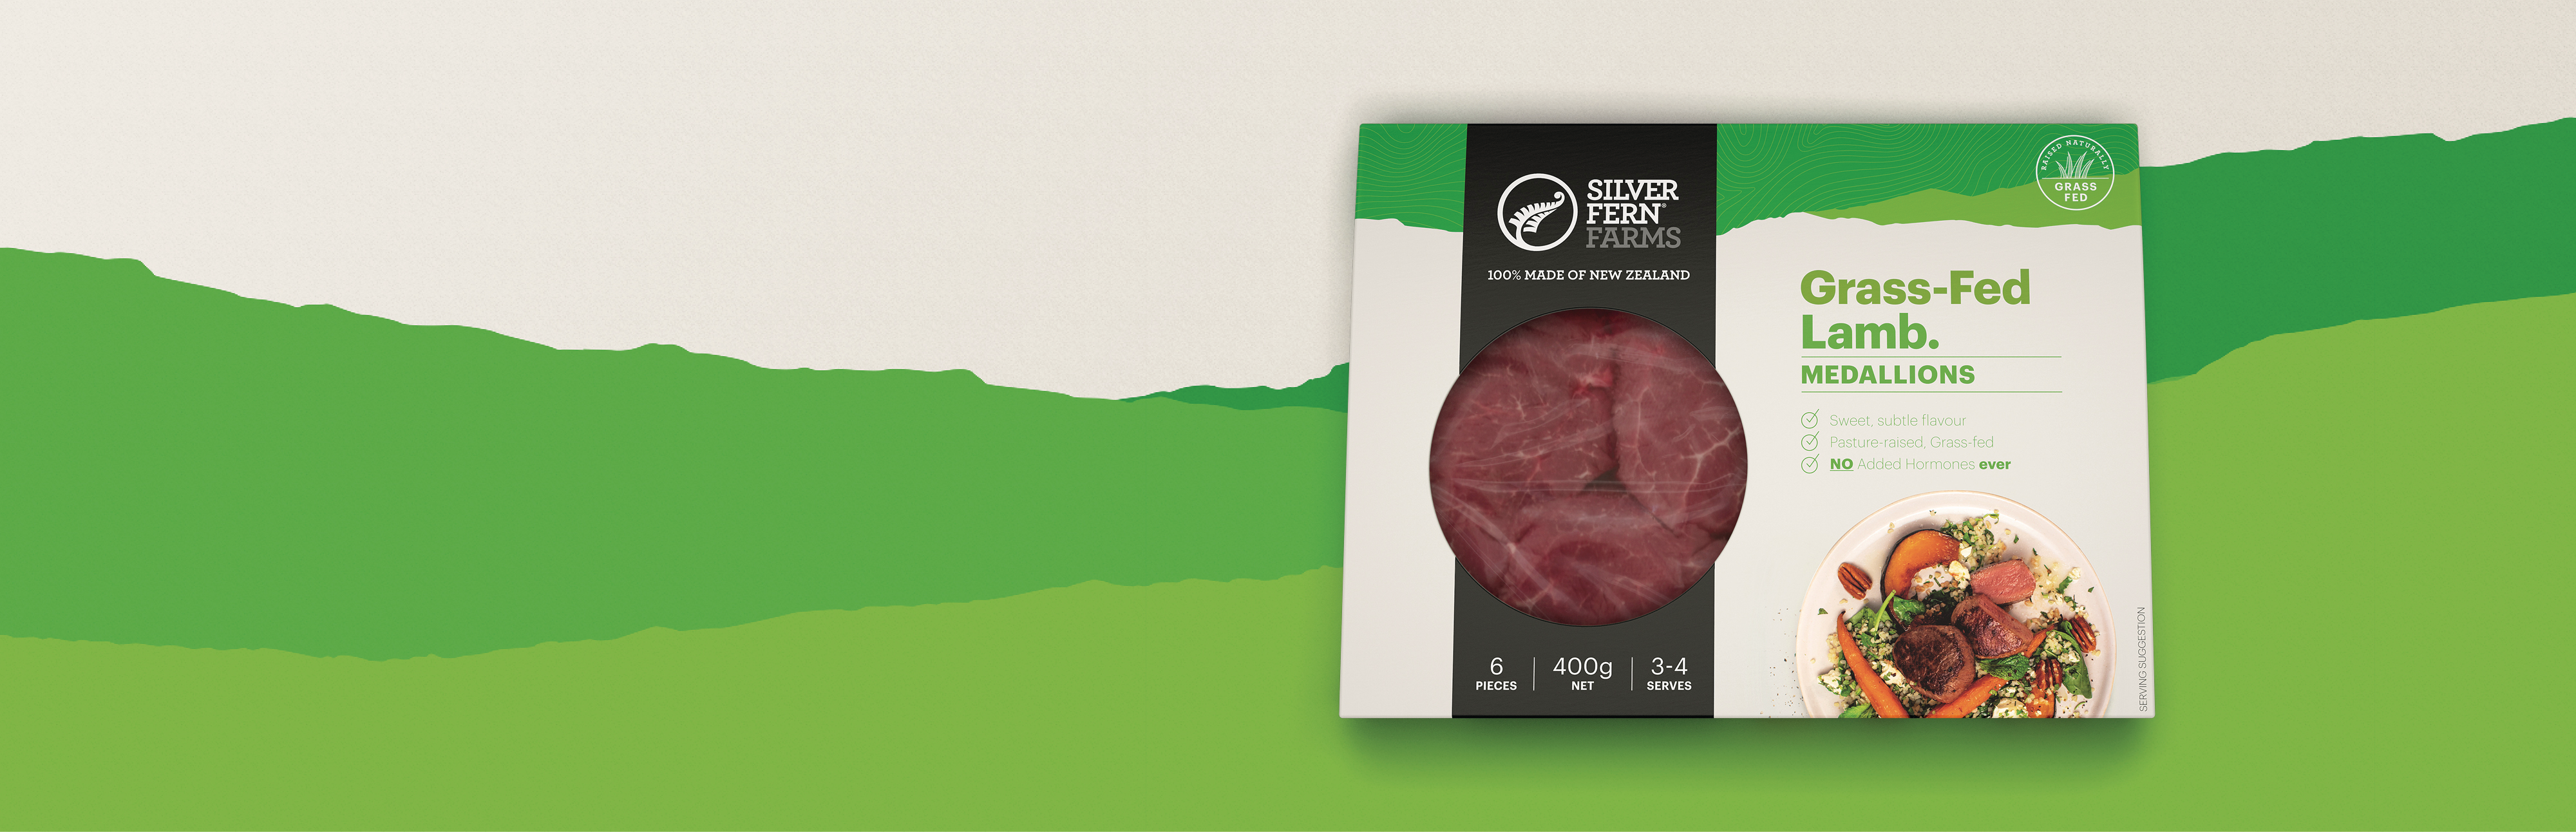 grass-fed Lamb Medallion packaging in front of an illustration of green hills